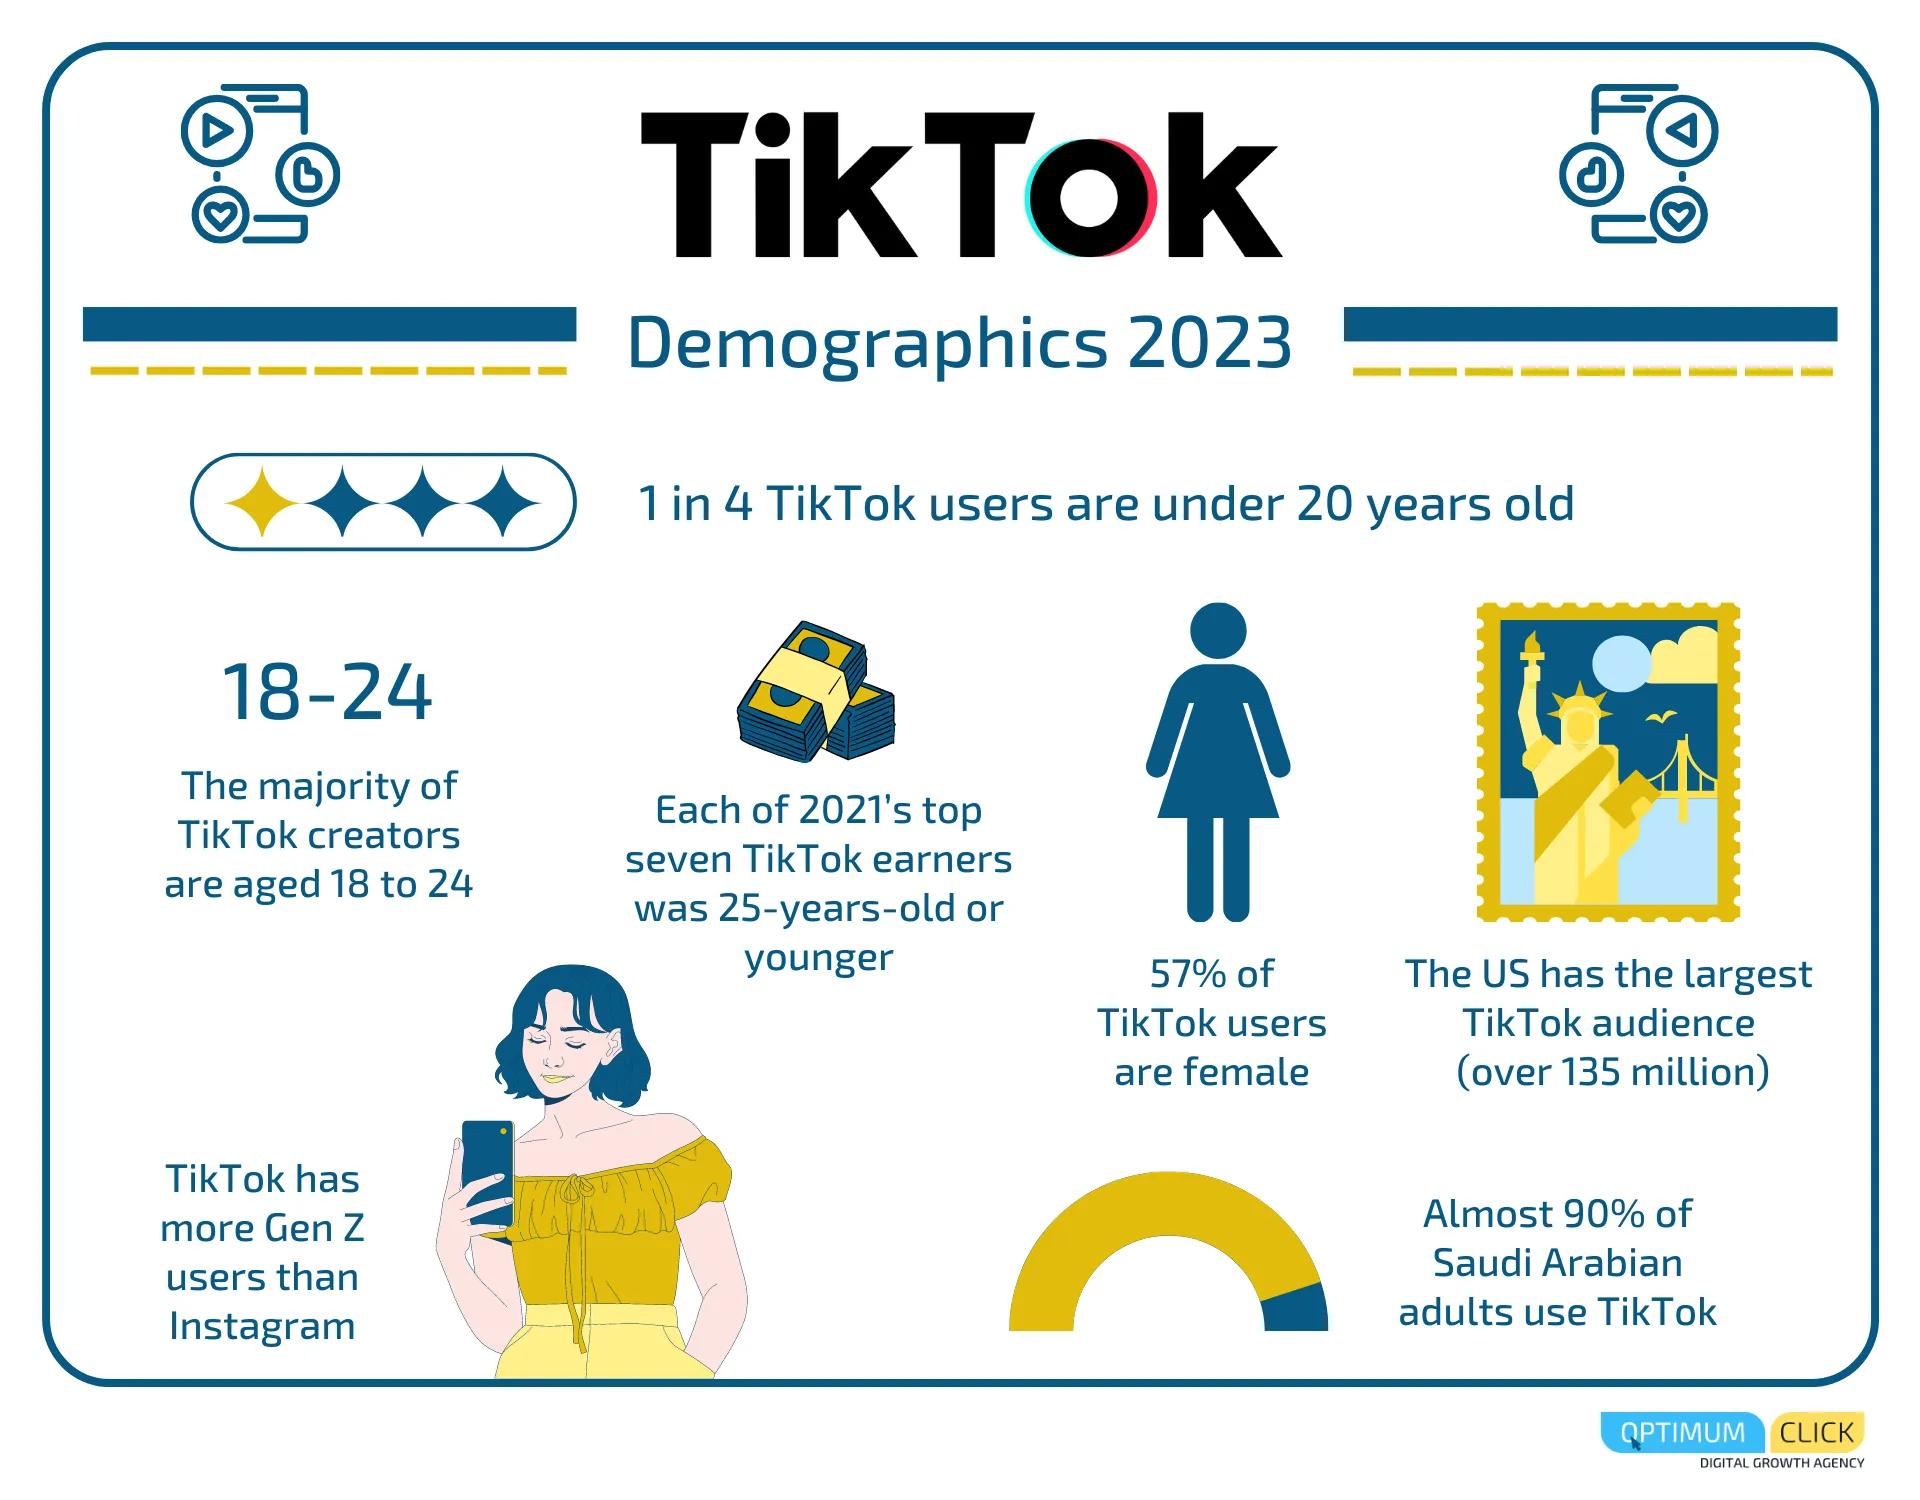 Demographics of TikTok users. The majority of TikTok users are aged 18 to 24, Gen Z audience and mostly females.